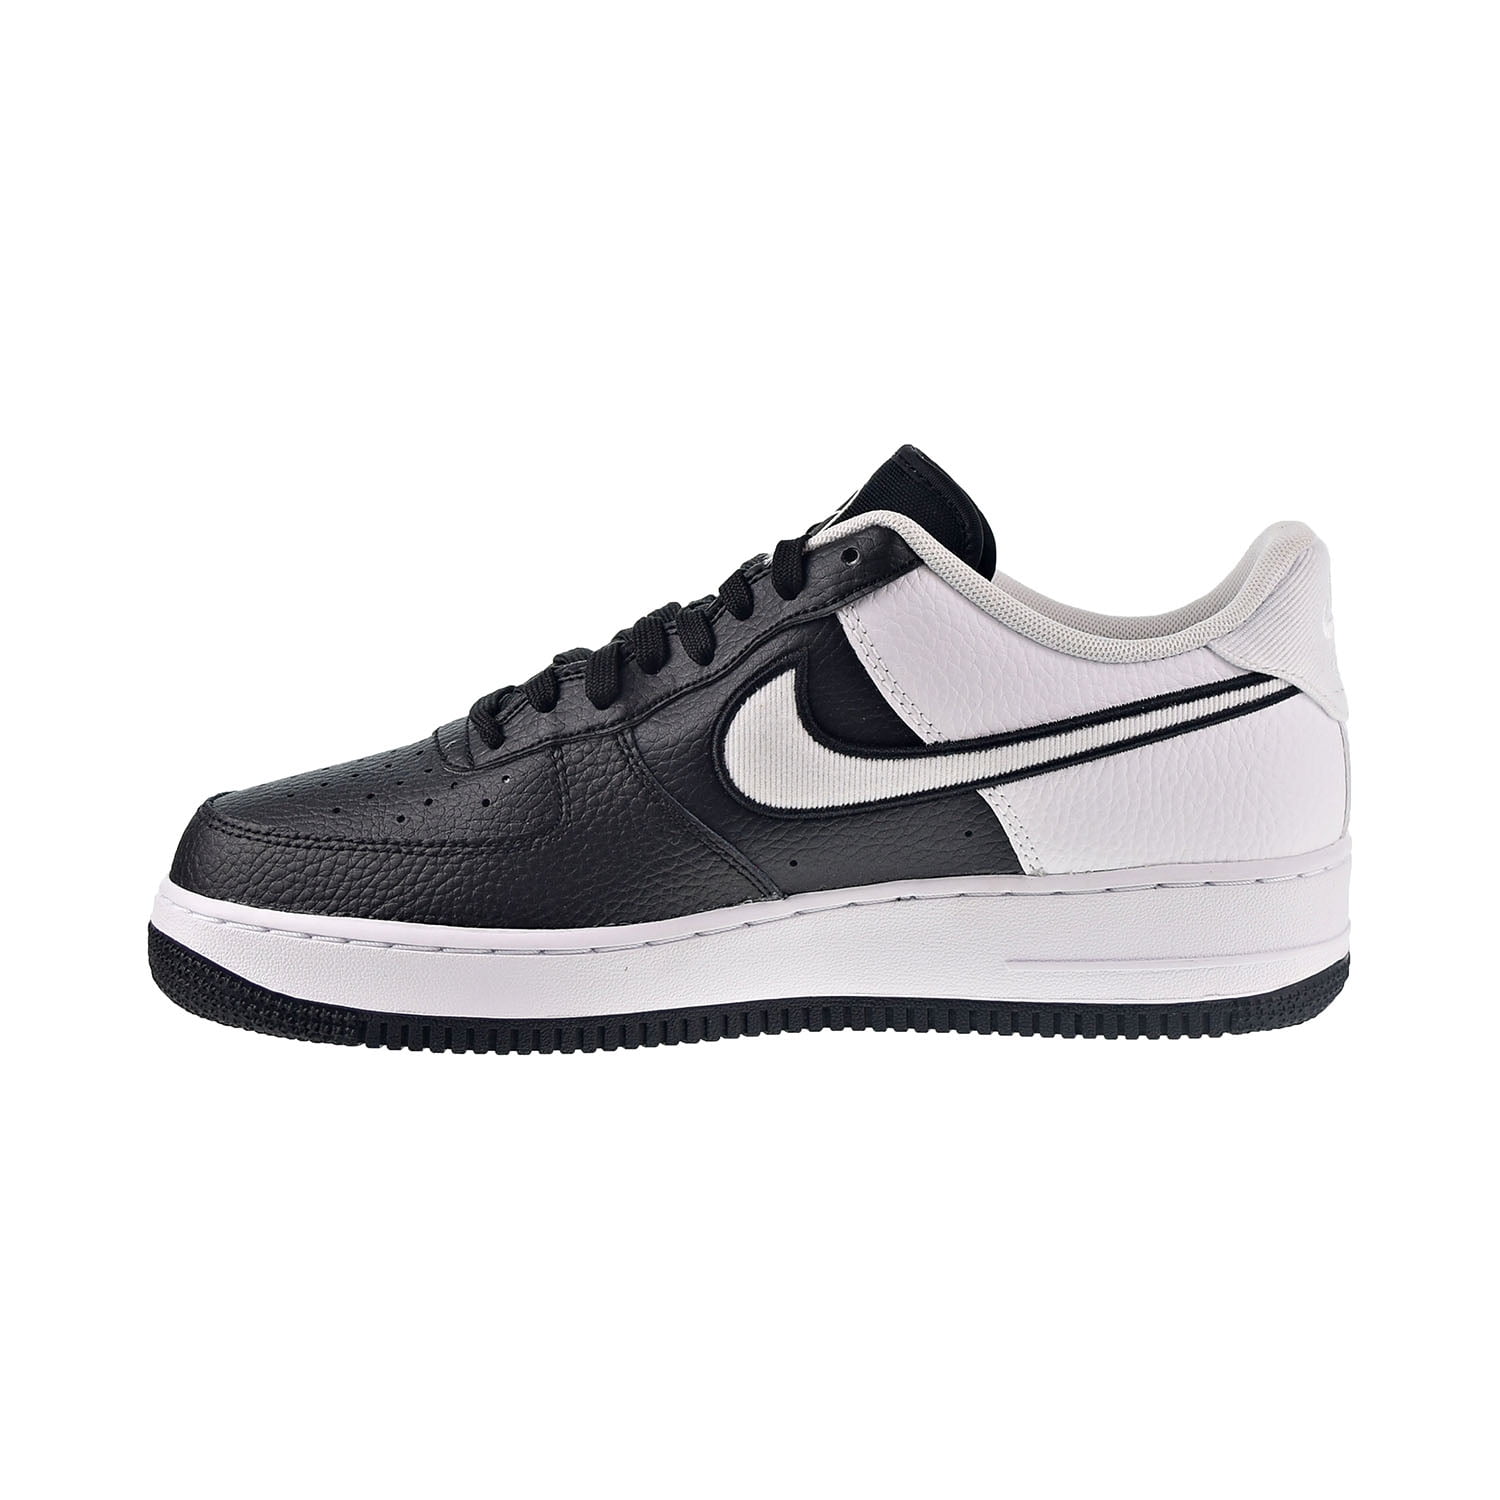 Size 10 - Nike Air Force 1 Low '07 LV8 Black White AO2439 001 B-Grade NoLid  NEW